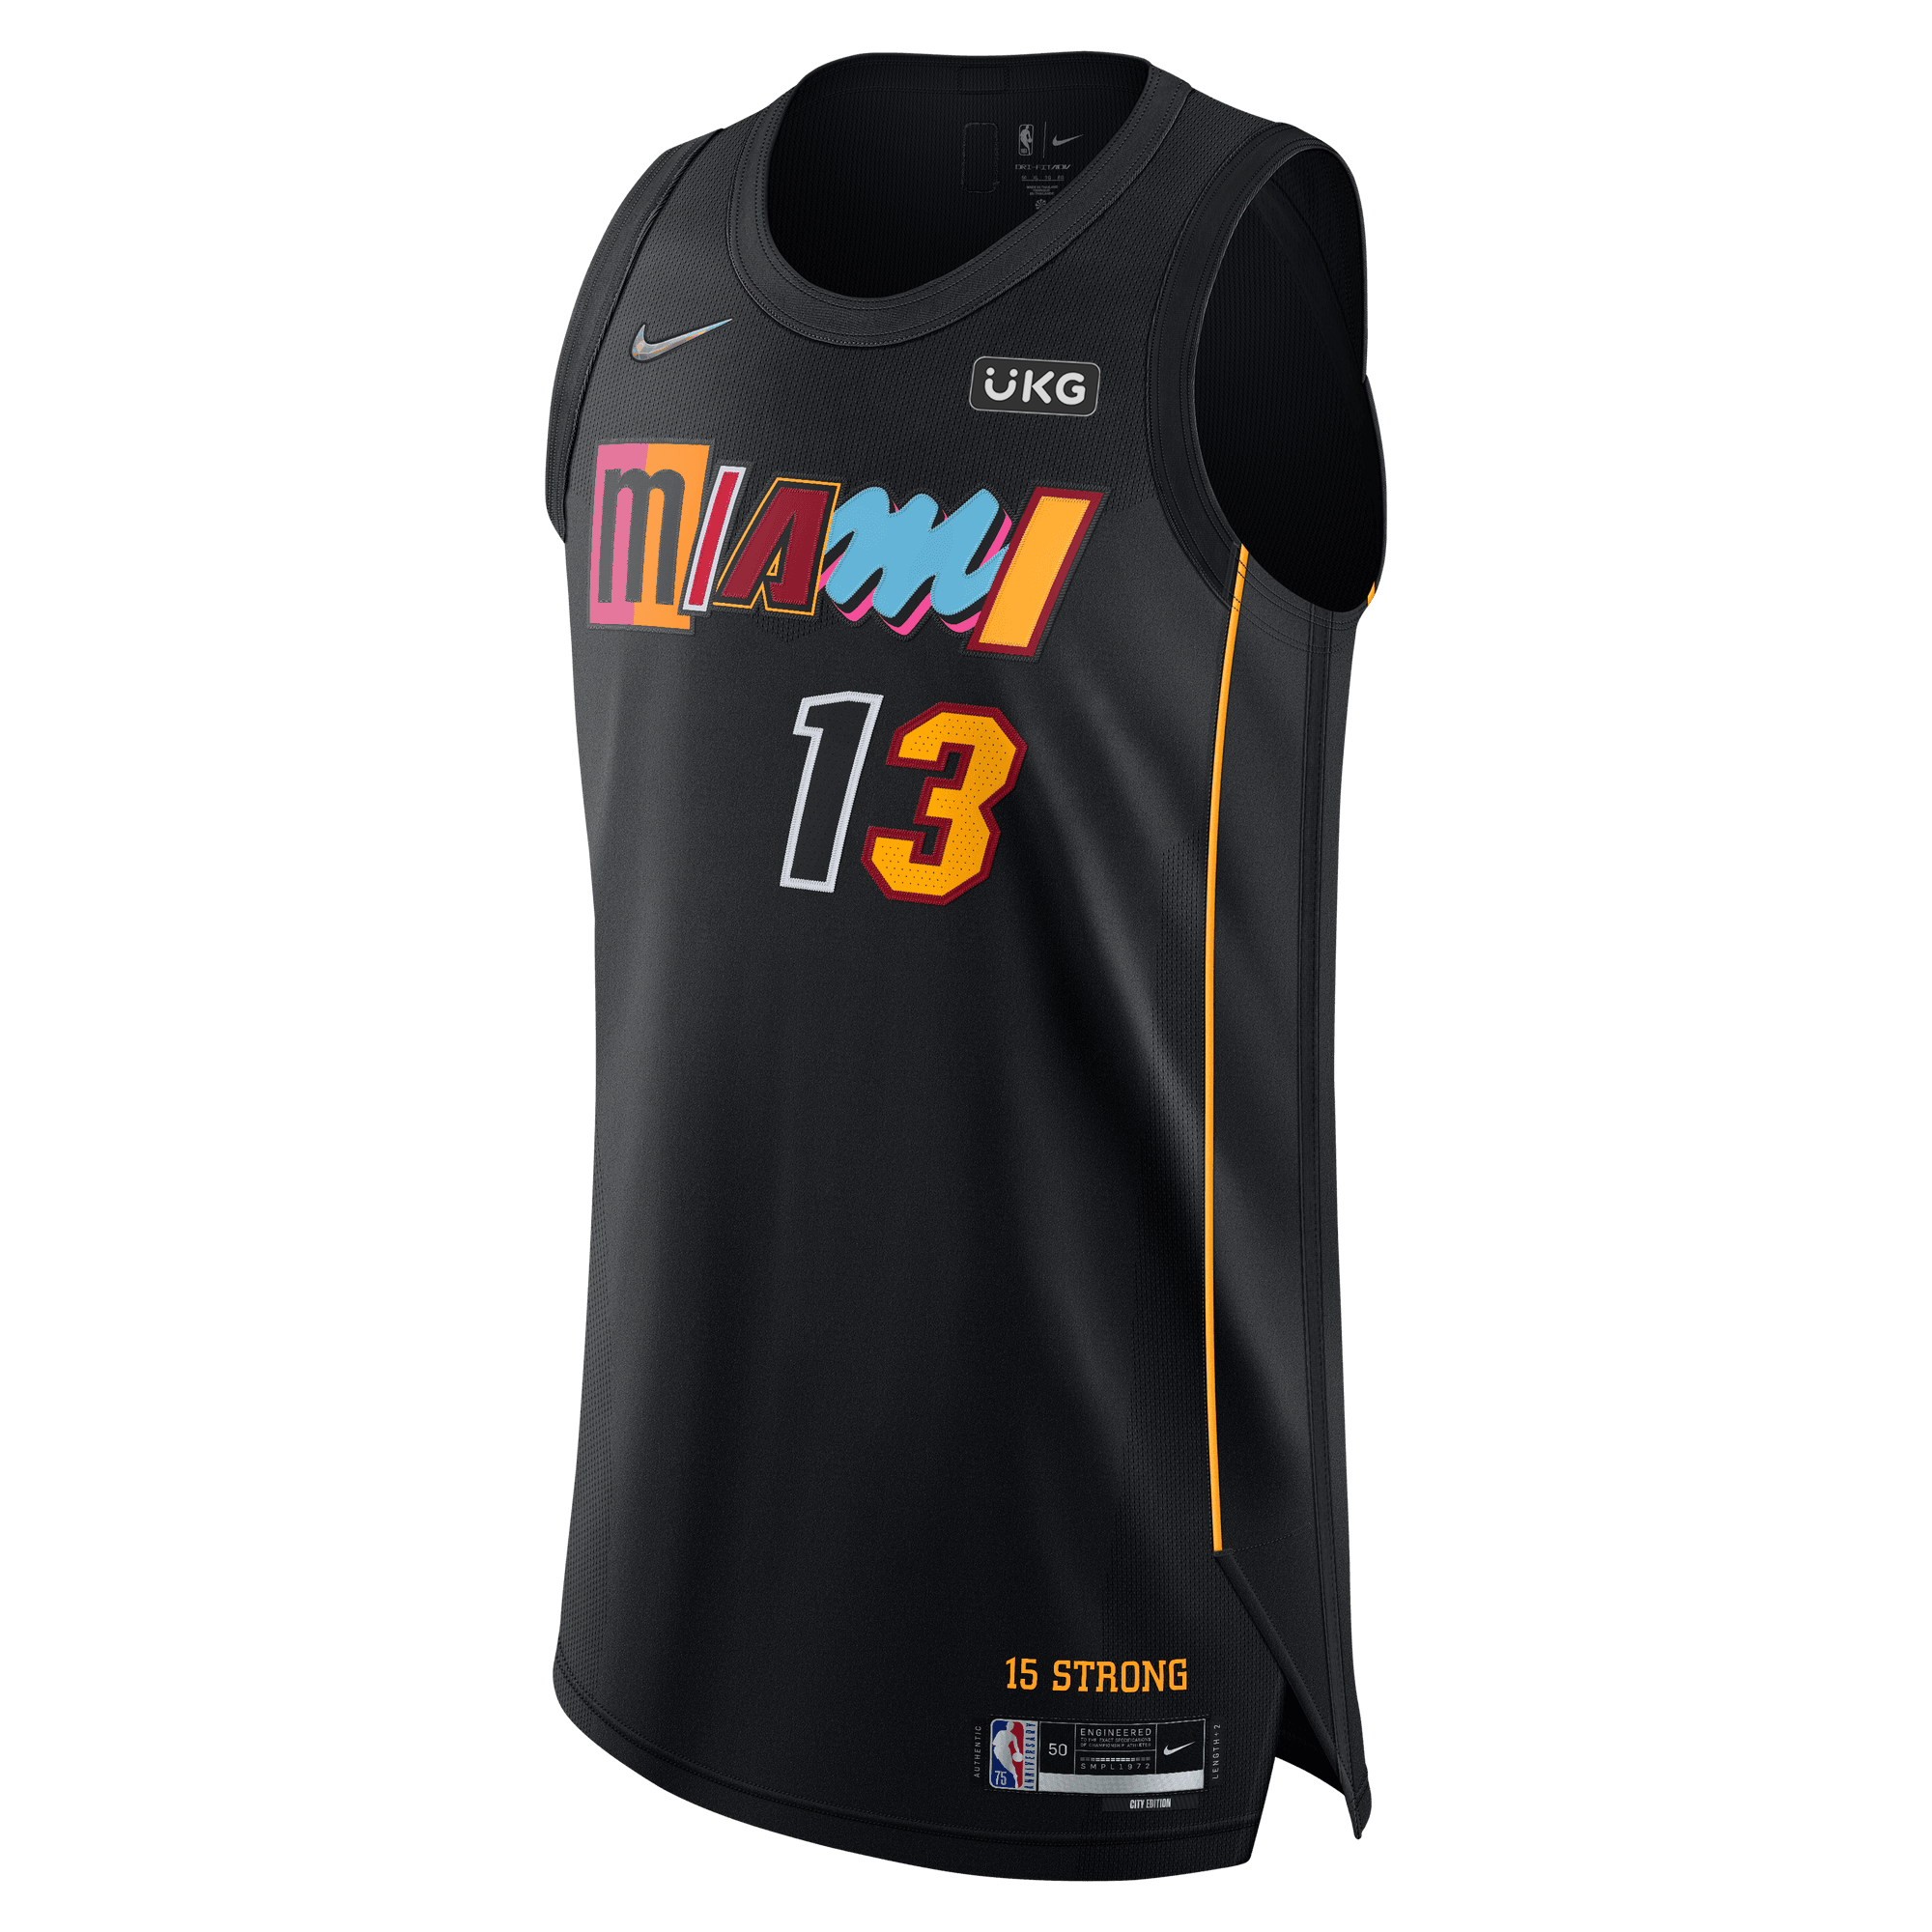 NBA Authentic Jerseys, NBA Official Authentic Uniforms and Jerseys